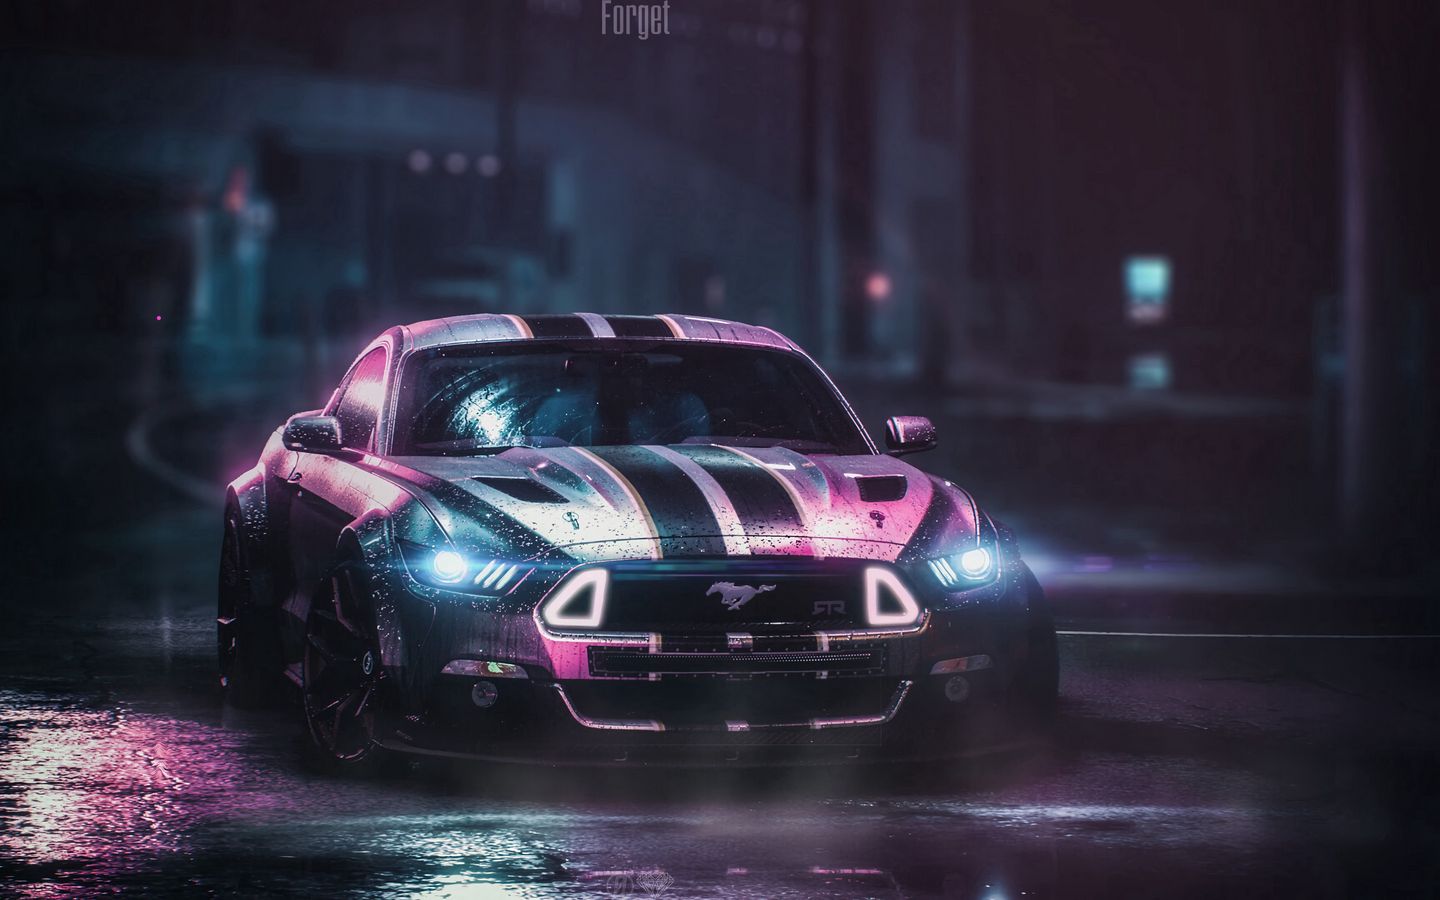 Download wallpaper 1440x900 ford mustang gtr, ford, car, neon, night, wet  widescreen 16:10 hd background